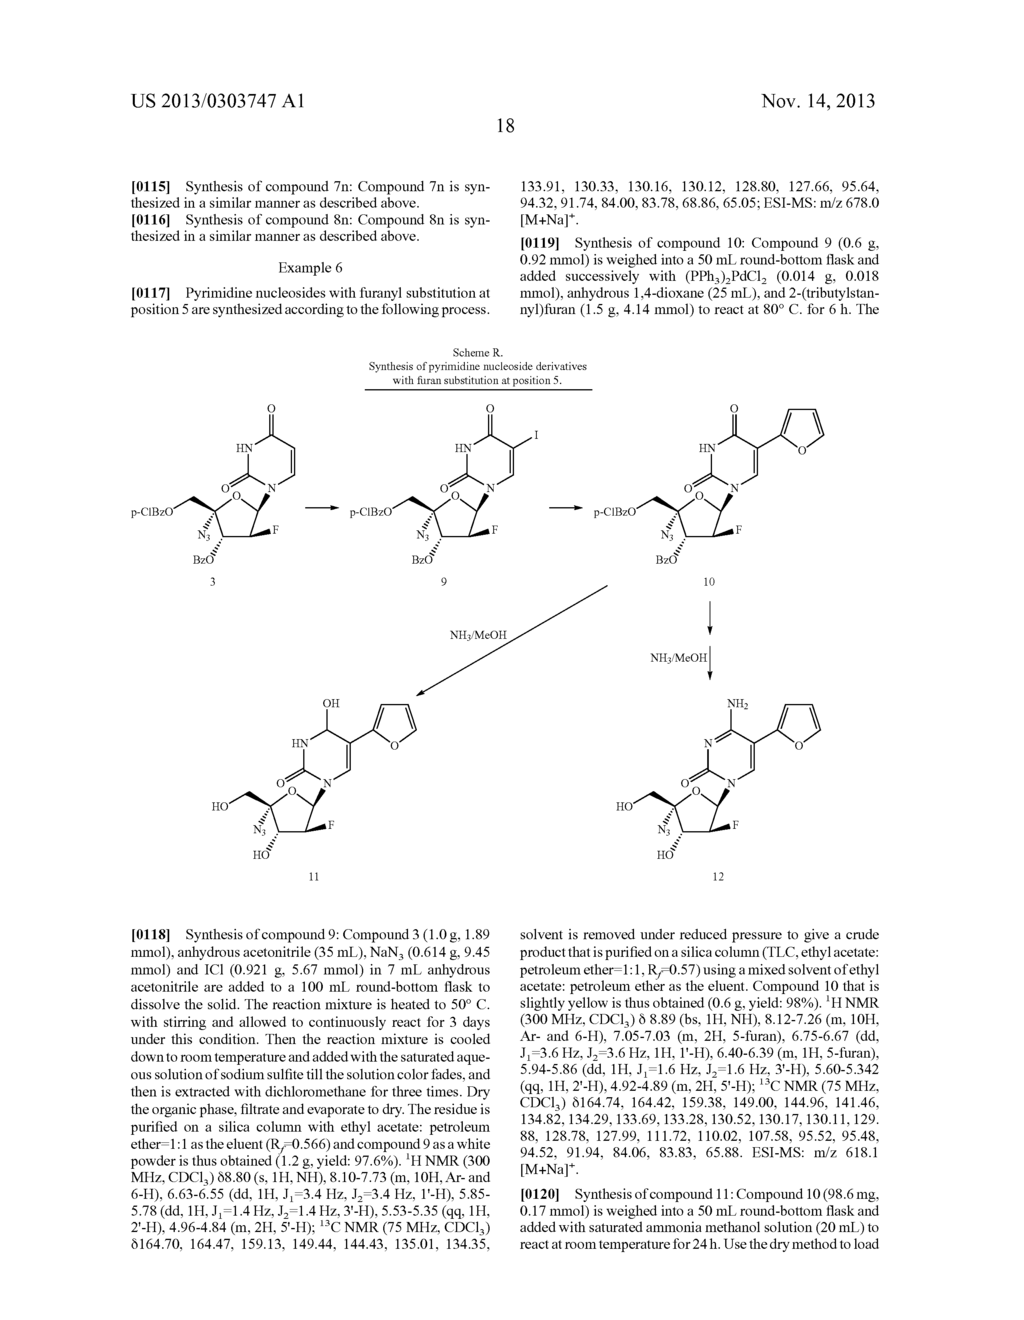 PYRIMIDINE NUCLEOSIDE DERIVATIVES, SYNTHESIS METHODS AND USES THEREOF FOR     PREPARING ANTI-TUMOR AND ANTI-VIRUS MEDICAMENTS - diagram, schematic, and image 19